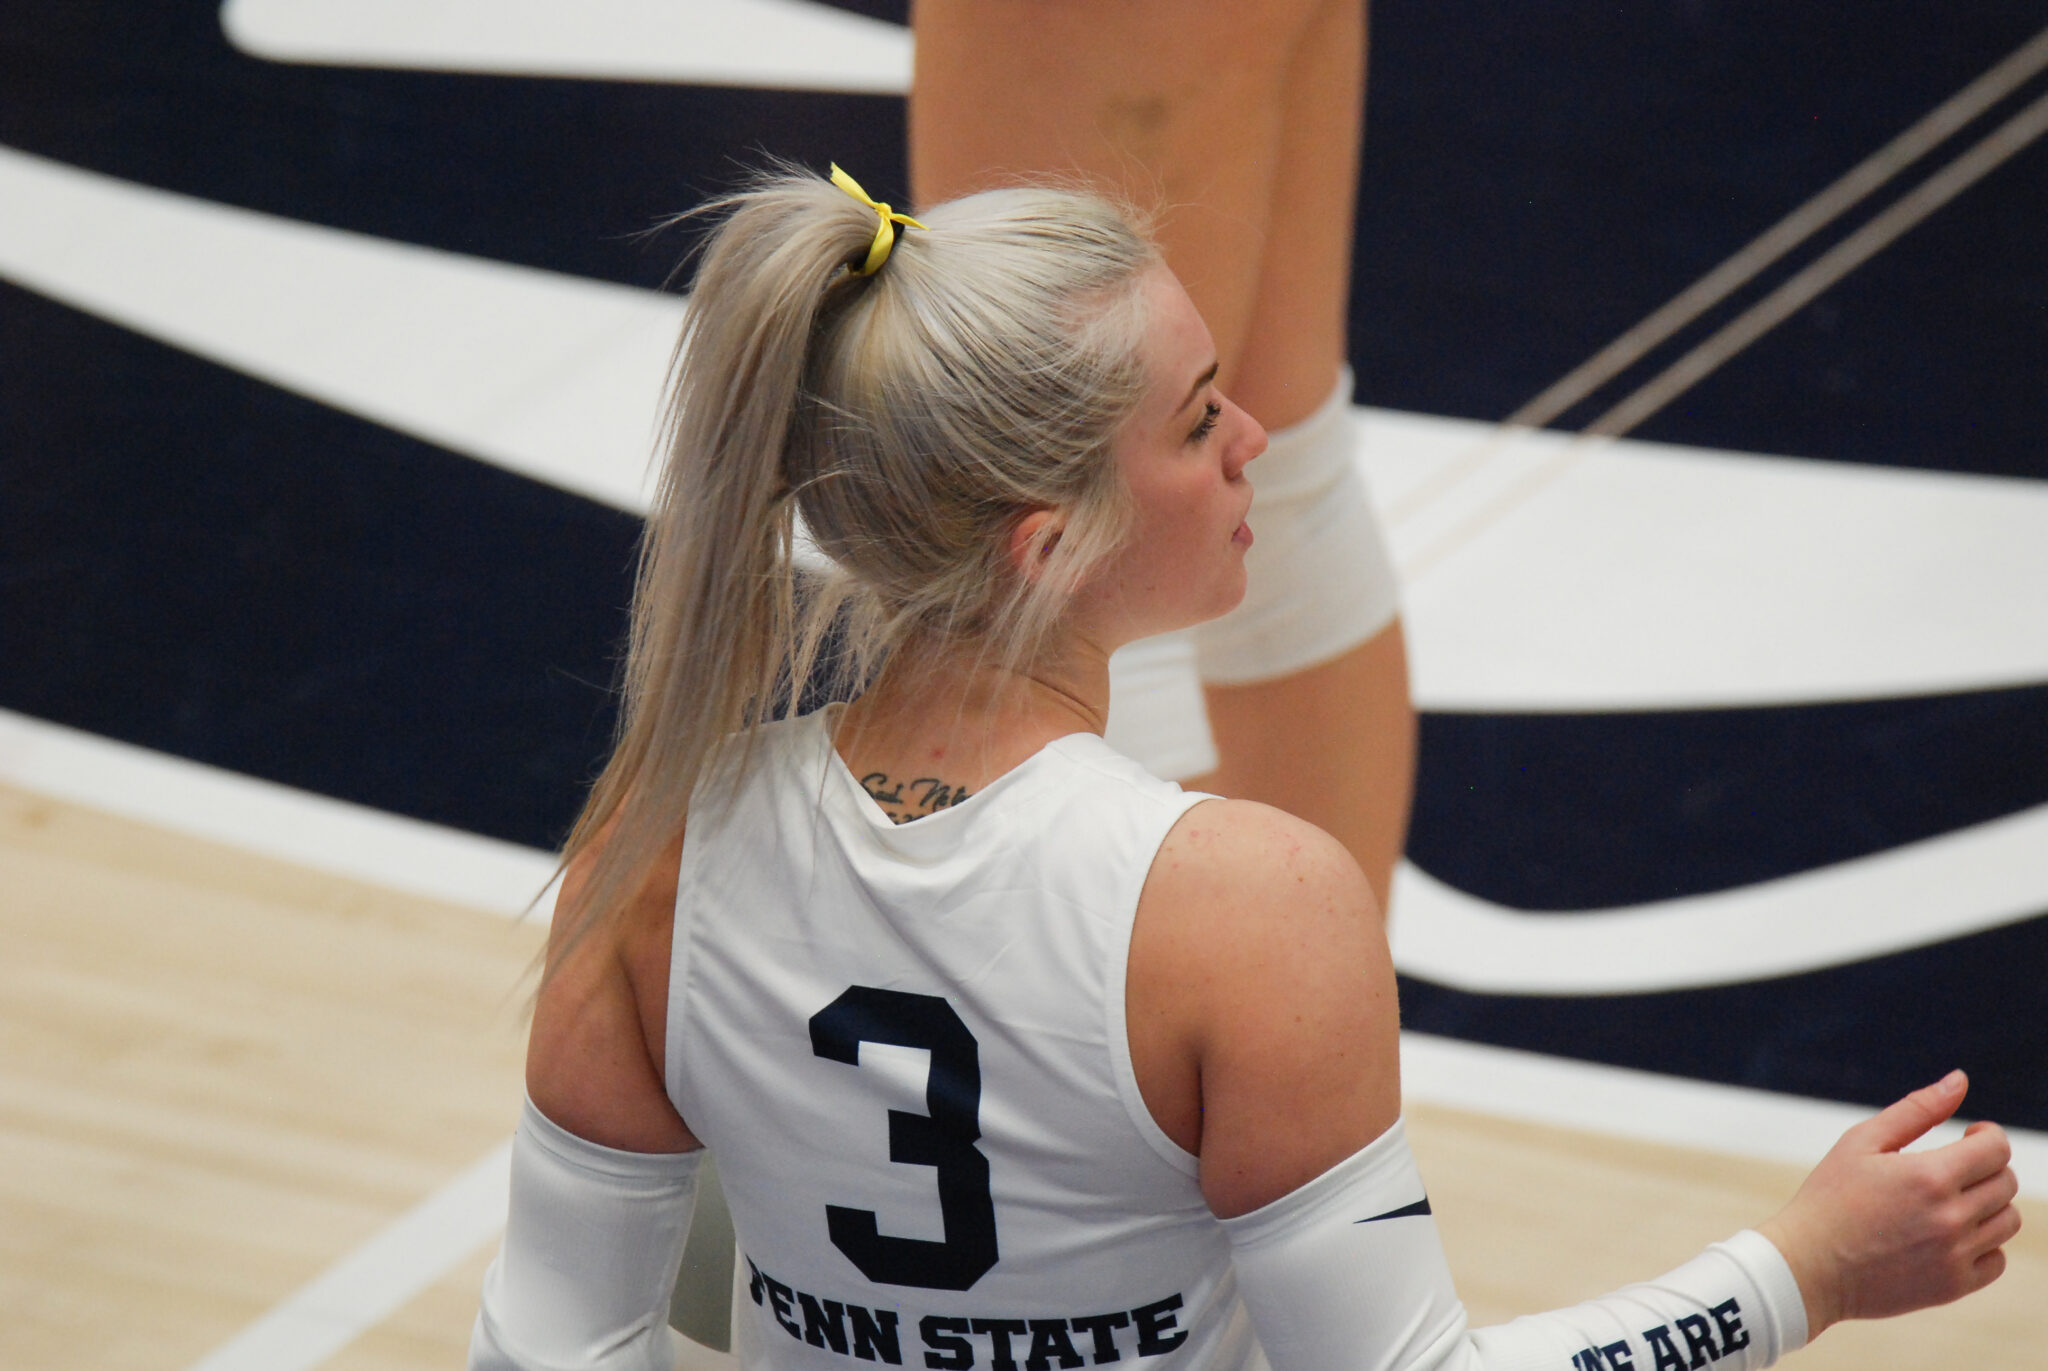 Penn State Volleyball Releases Full 2021 Schedule – DigNittanyVolleyball.com